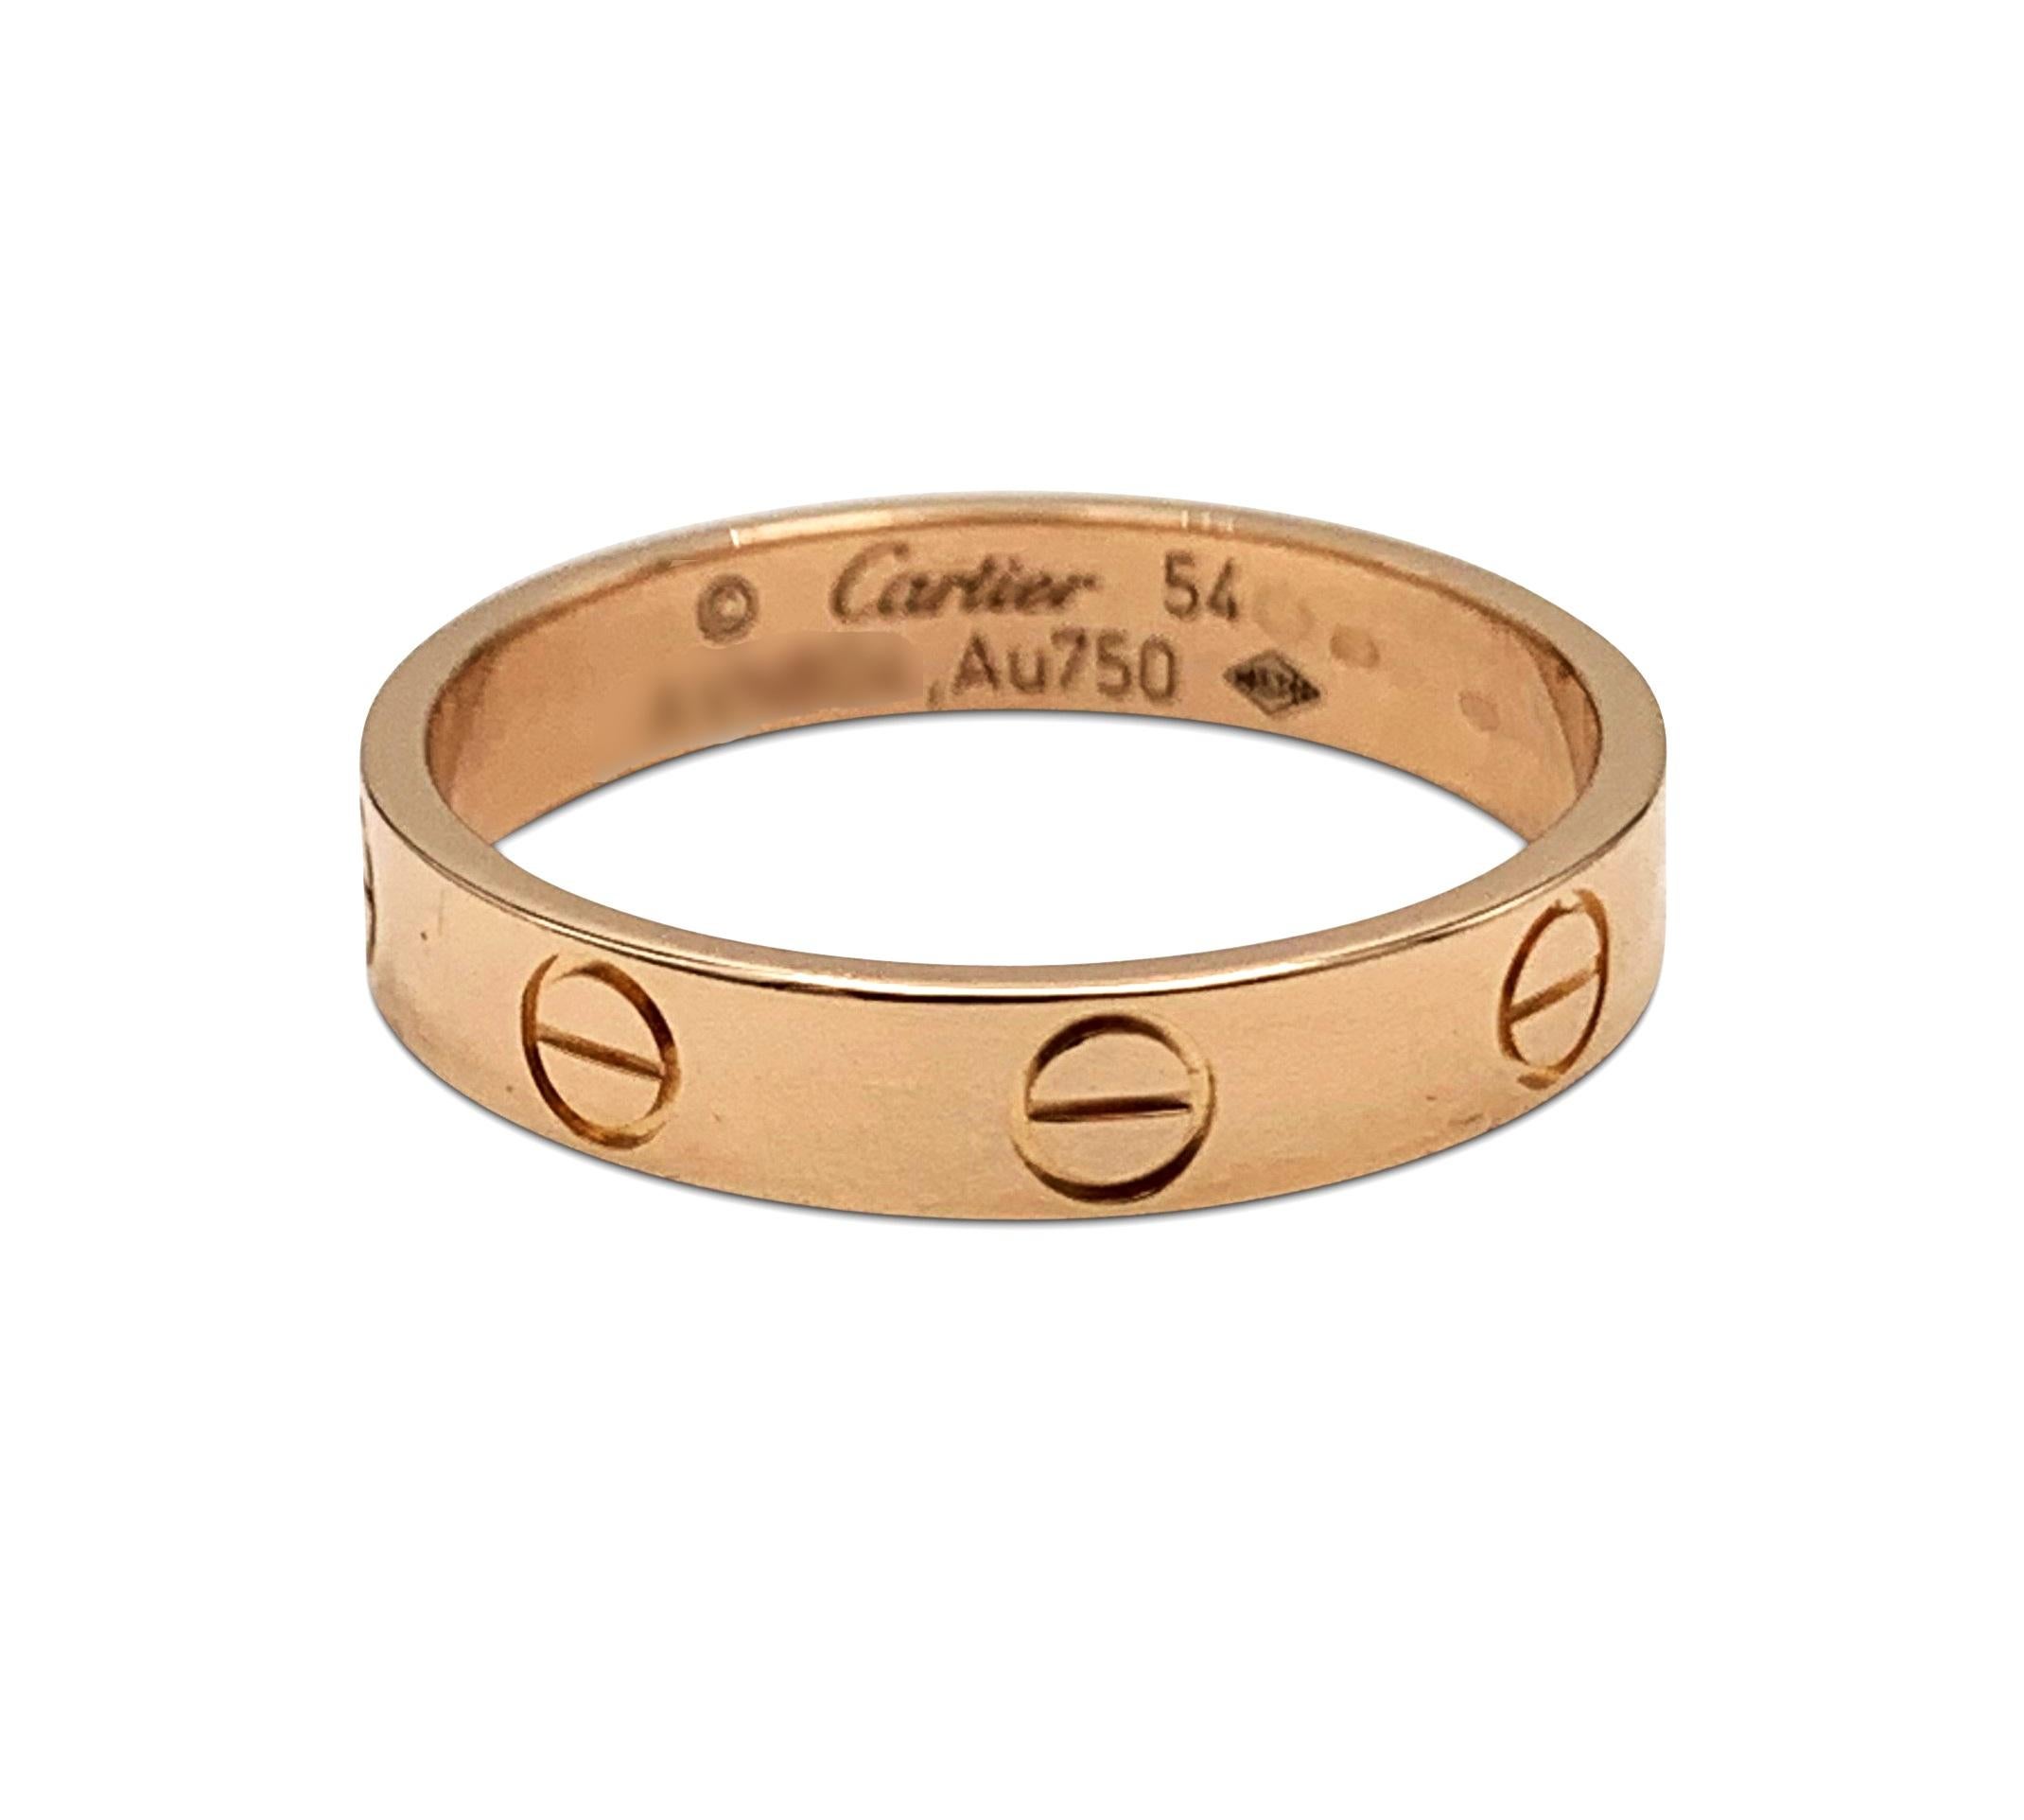 Authentic Cartier Love Ring crafted in 18 karat rose gold.  Signed Cartier, 54, Au 750, with serial number and hallmarks.  Size 54, US size 6 3/4.  does not come with box or papers.  CIRCA 2010s